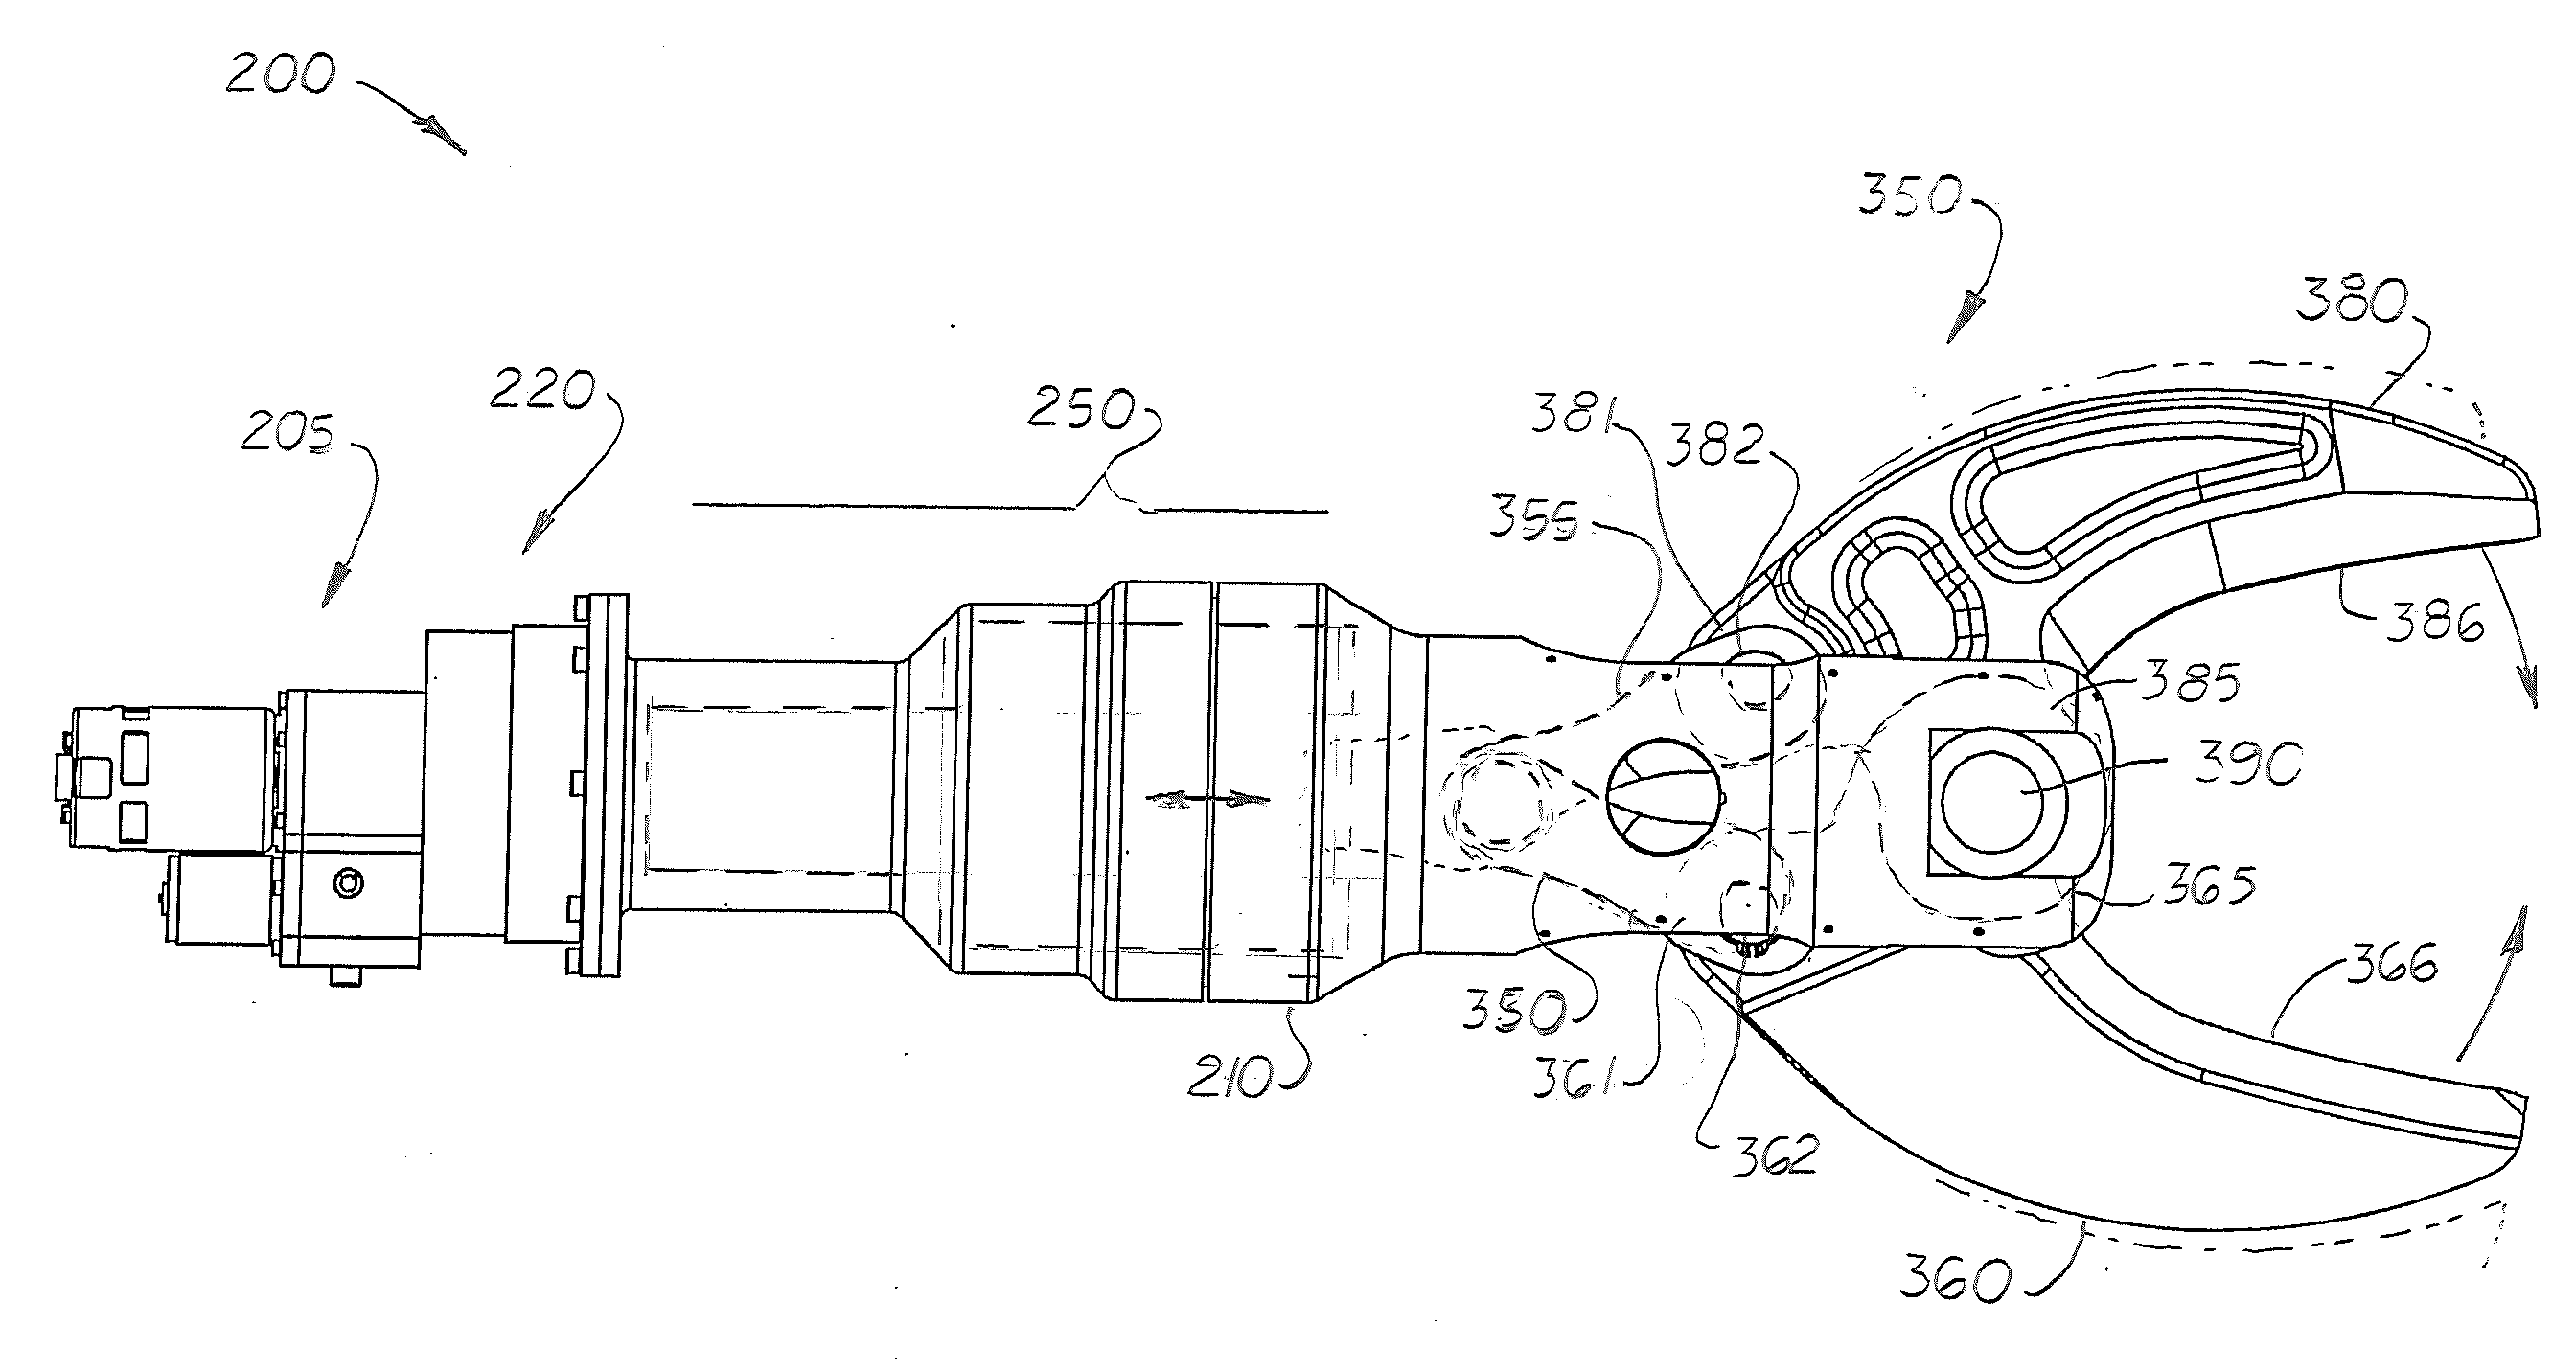 Tool With Linear Drive Mechanism